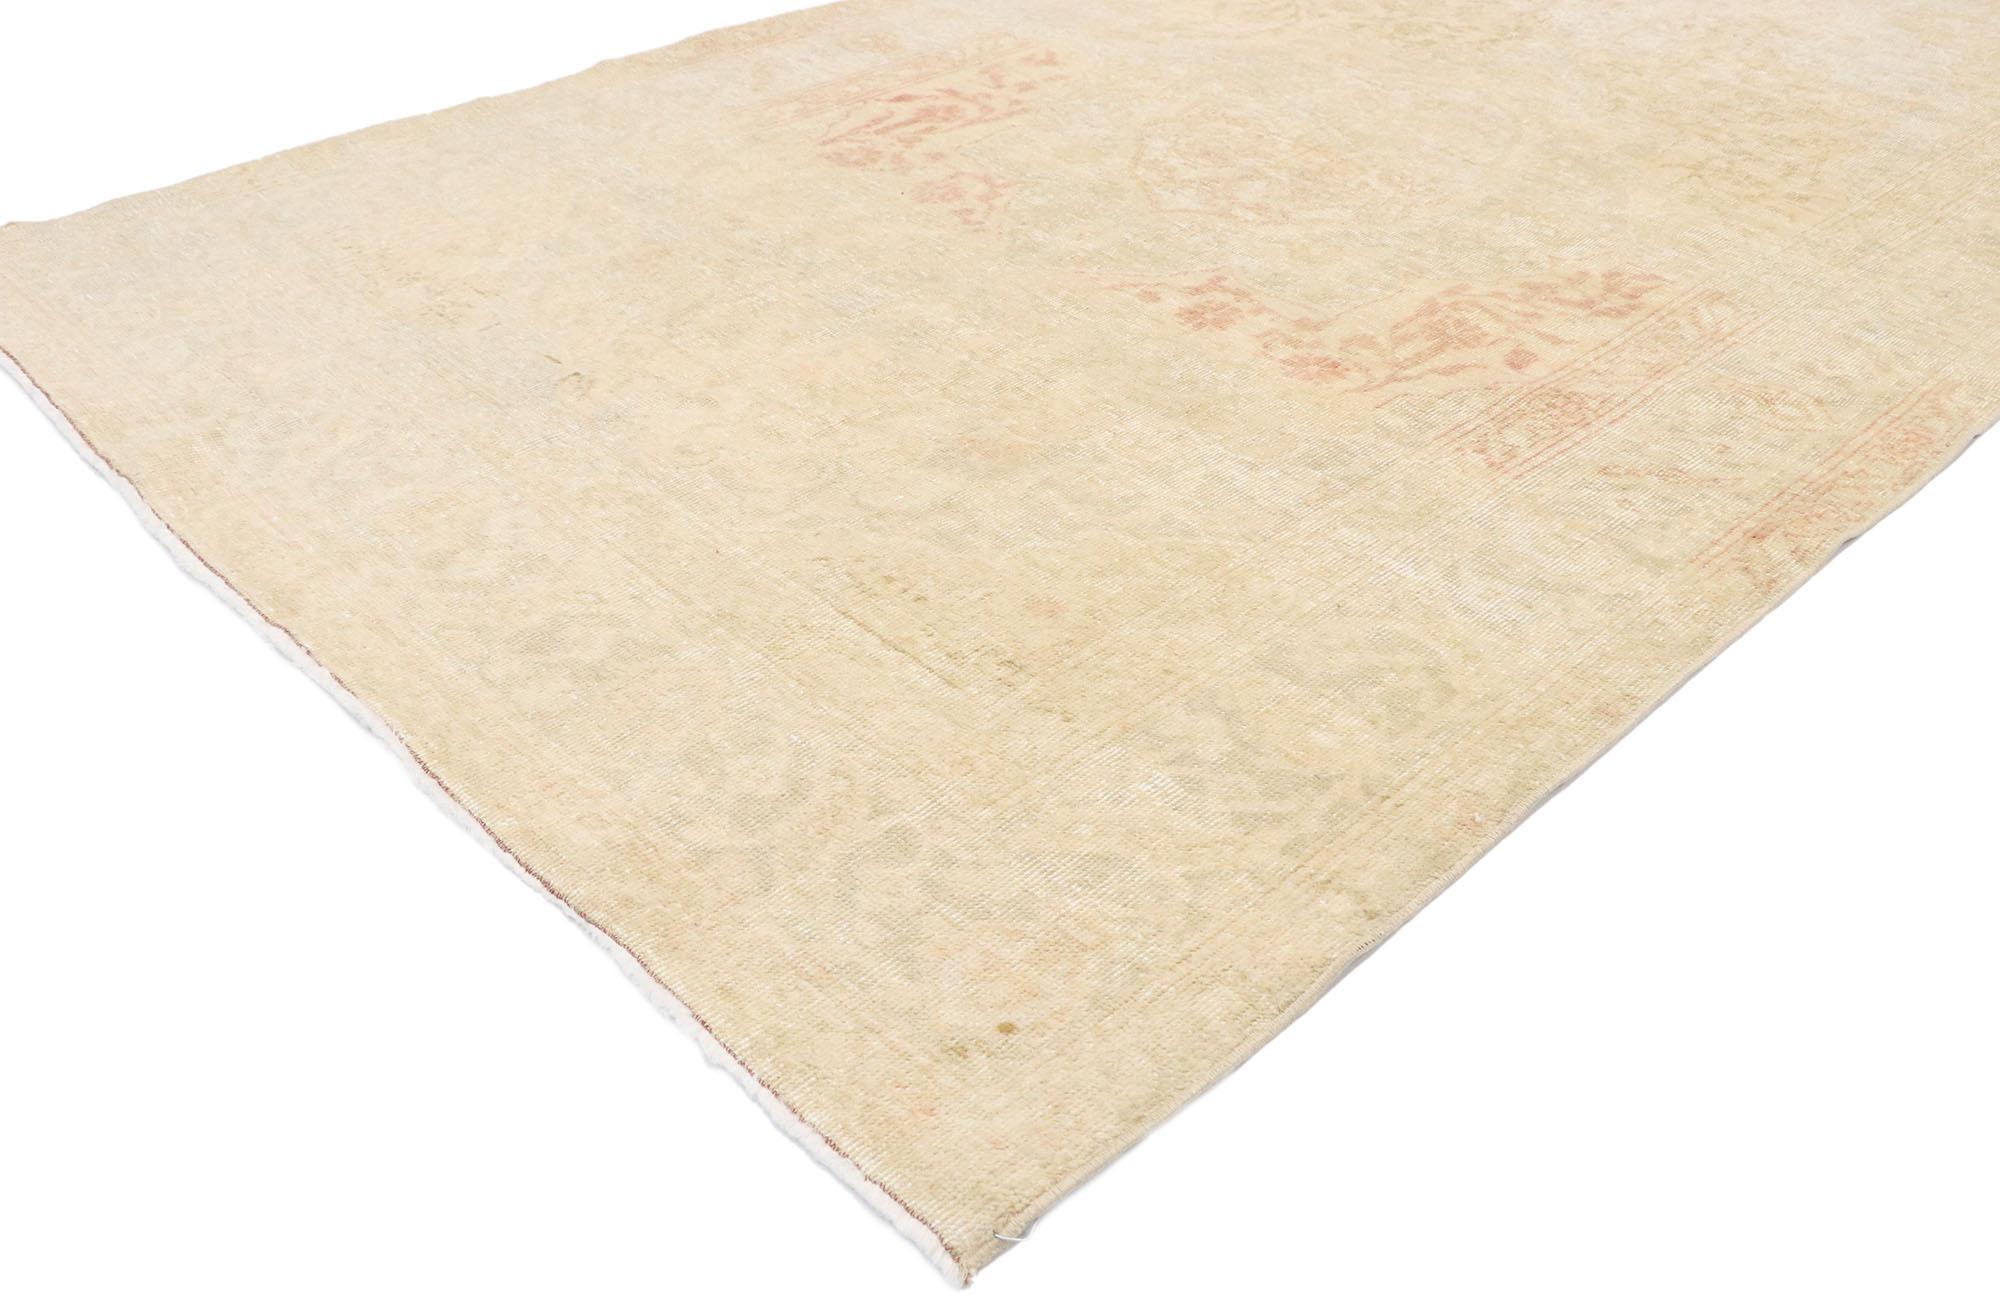 53472 Vintage Turkish Sivas rug with Romantic English Country Cottage style. With a timeless botanical pattern and rustic sensibility with a hint of romantic connotations, this hand knotted wool distressed vintage Turkish Sivas rug beautifully